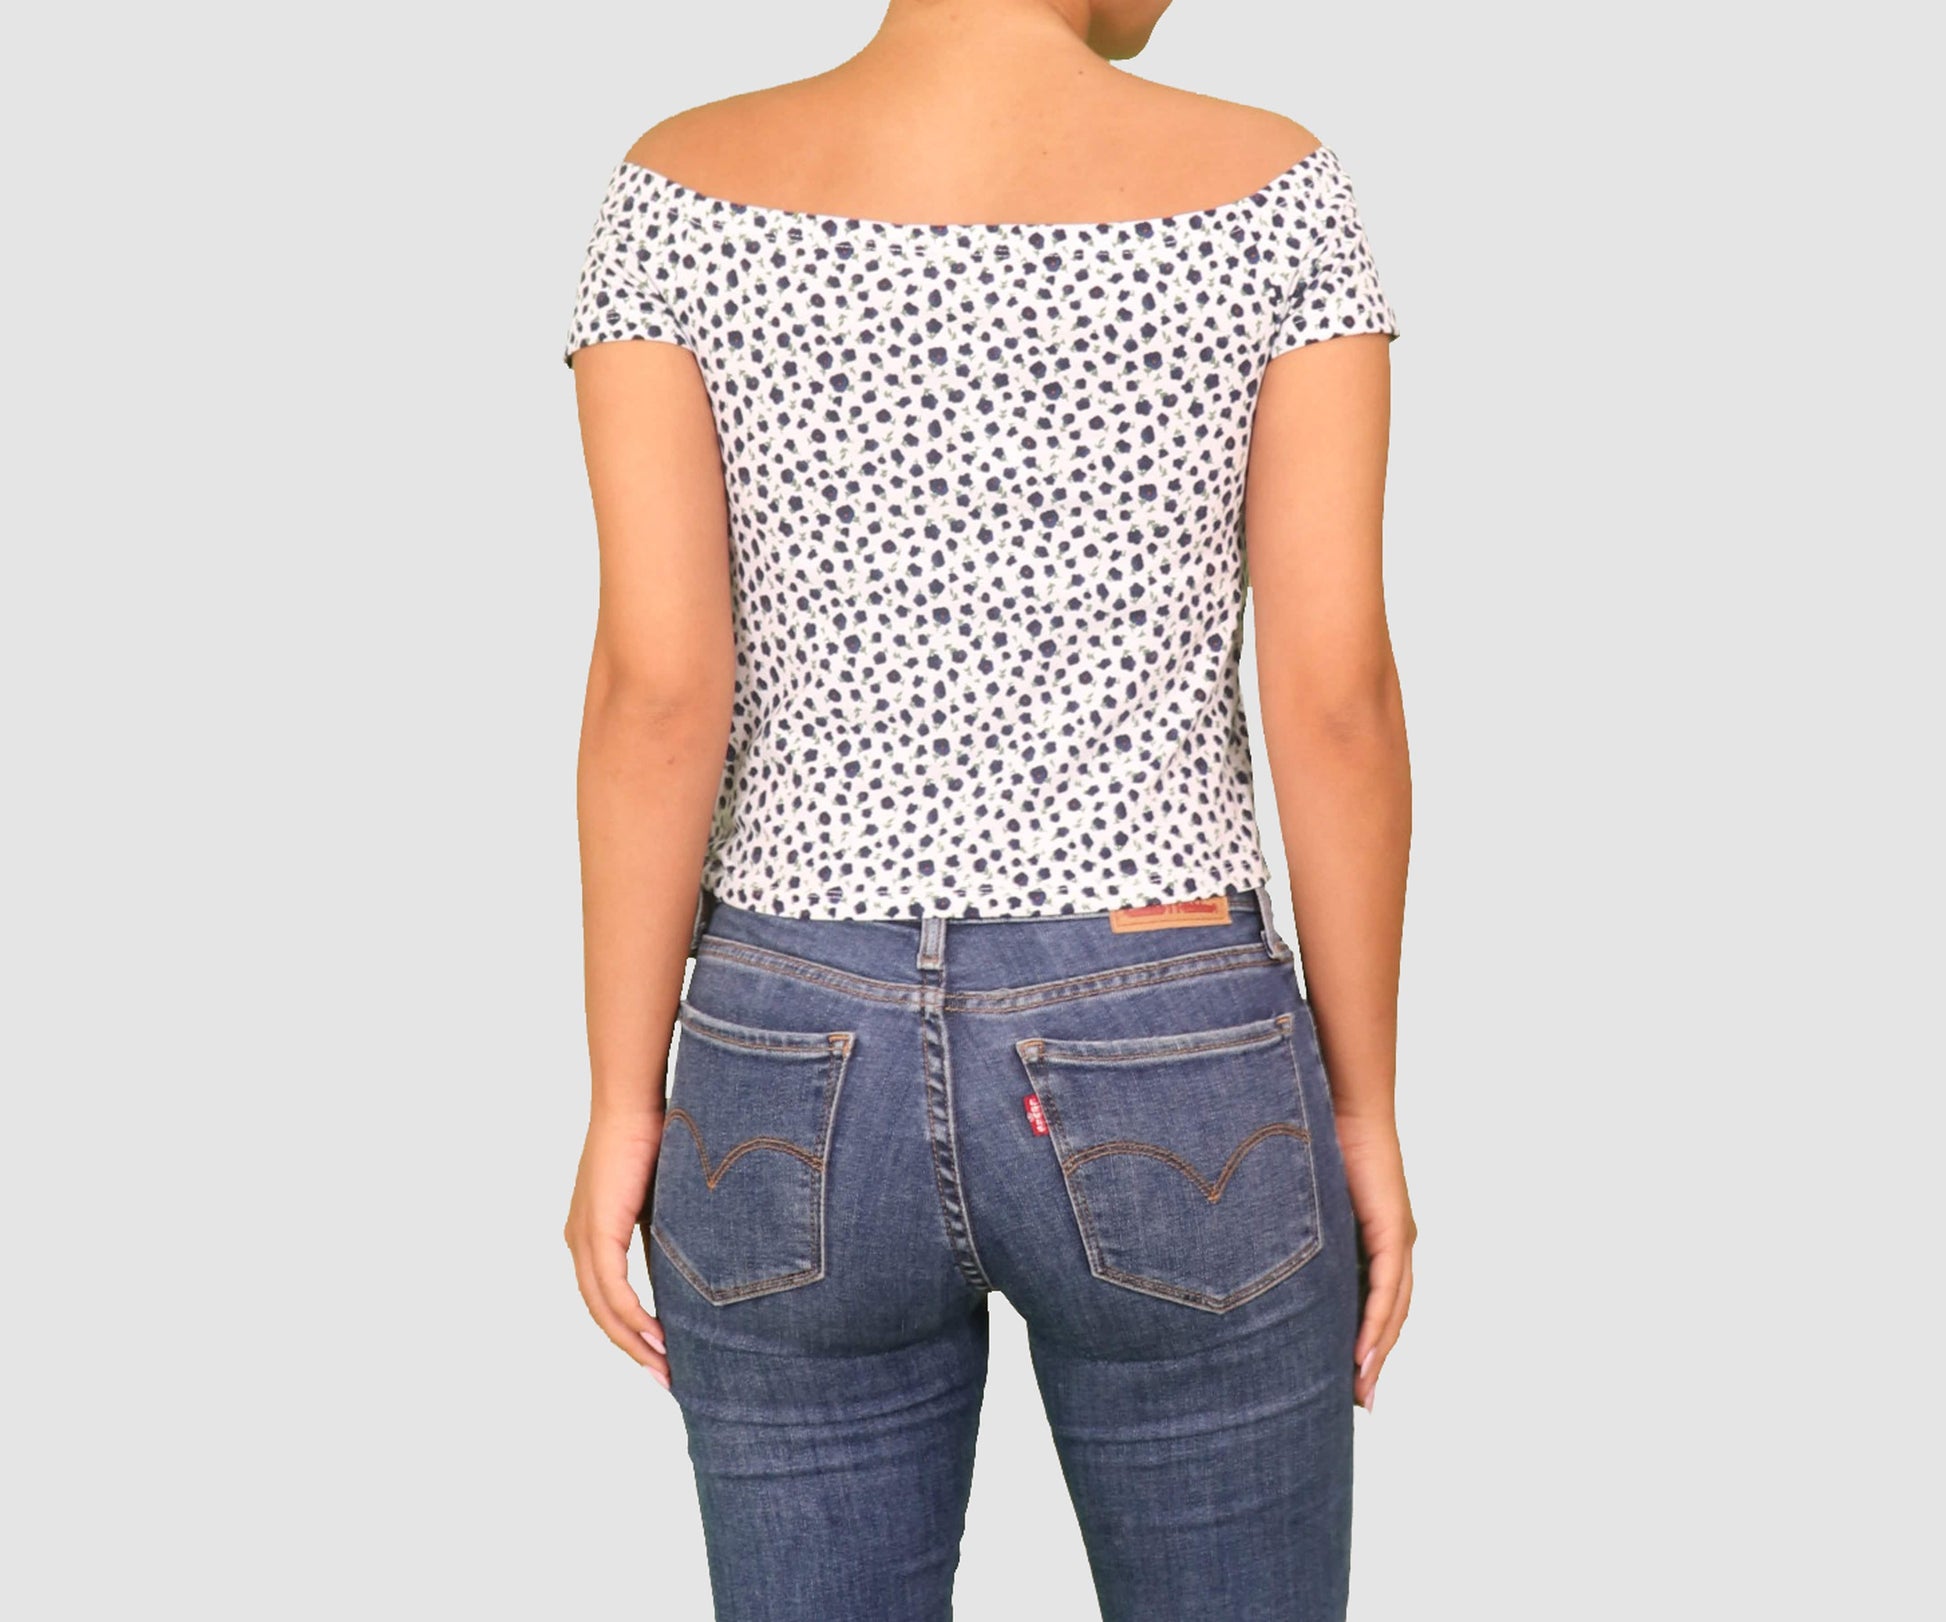 Basics By Pacsun Womens Tops Small / White/ Multi Short Sleeve Top